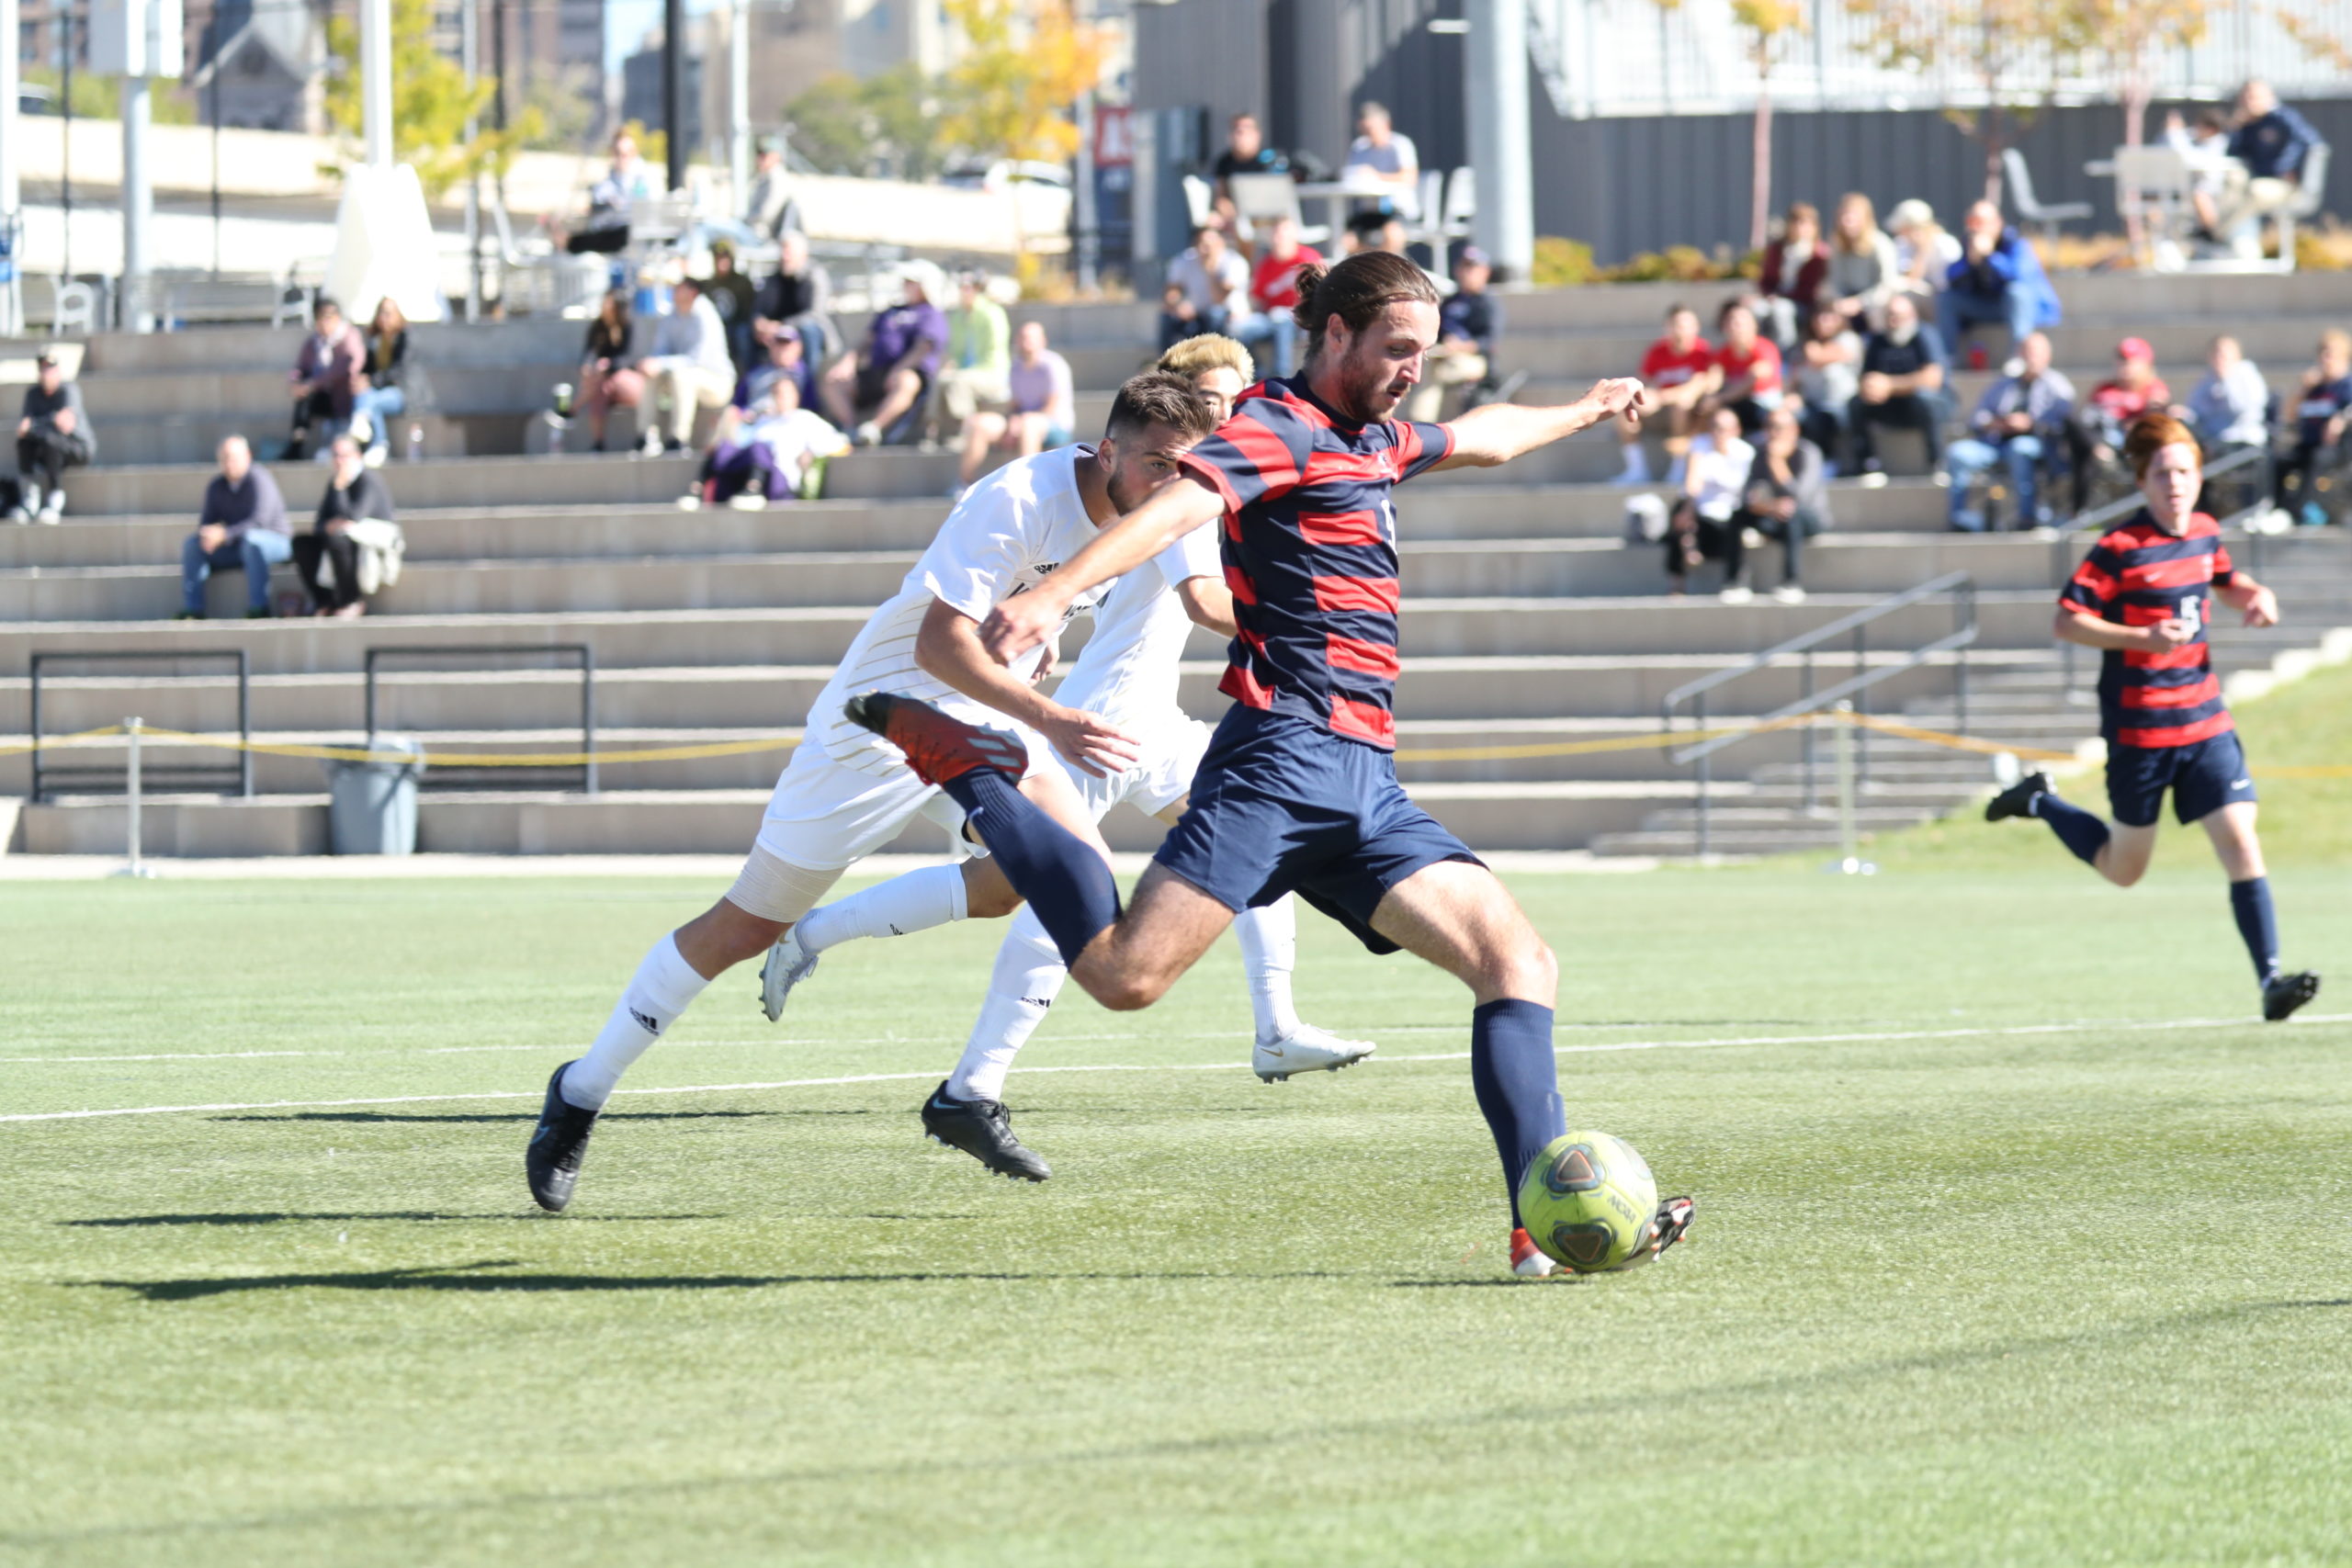 Men's soccer player Aidan Bates sets up for a shot during a game in 2021 with the Roadrunners crowd in the background.